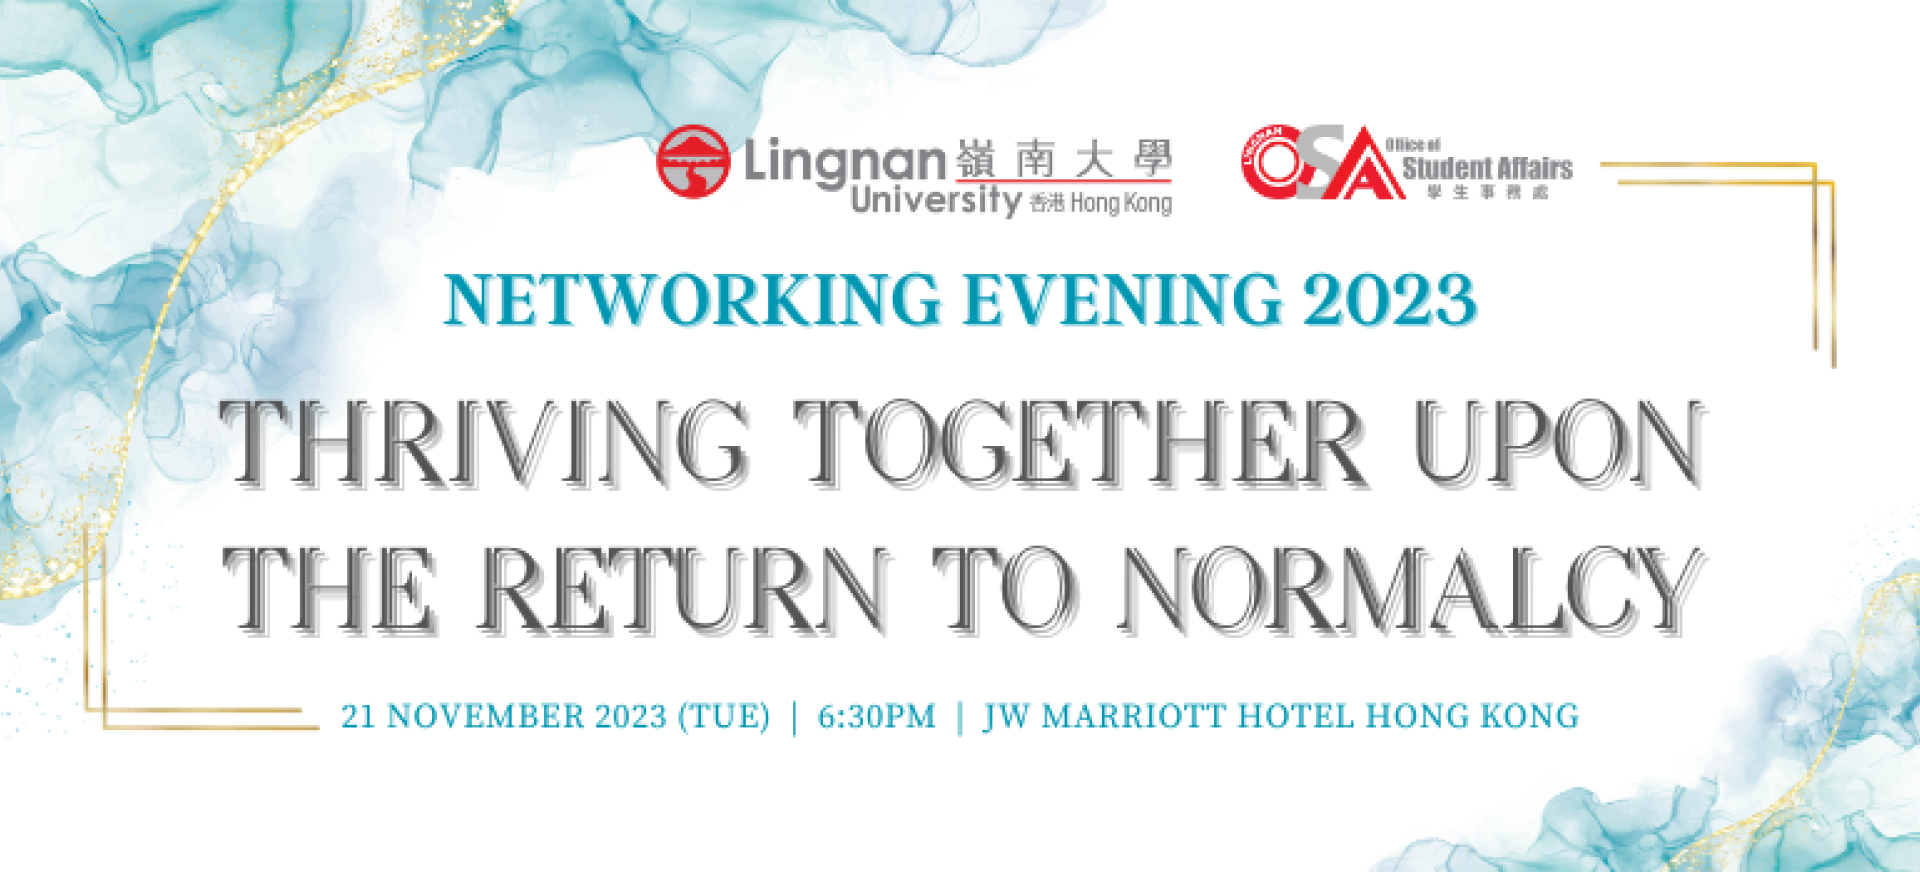 Networking Evening 2023